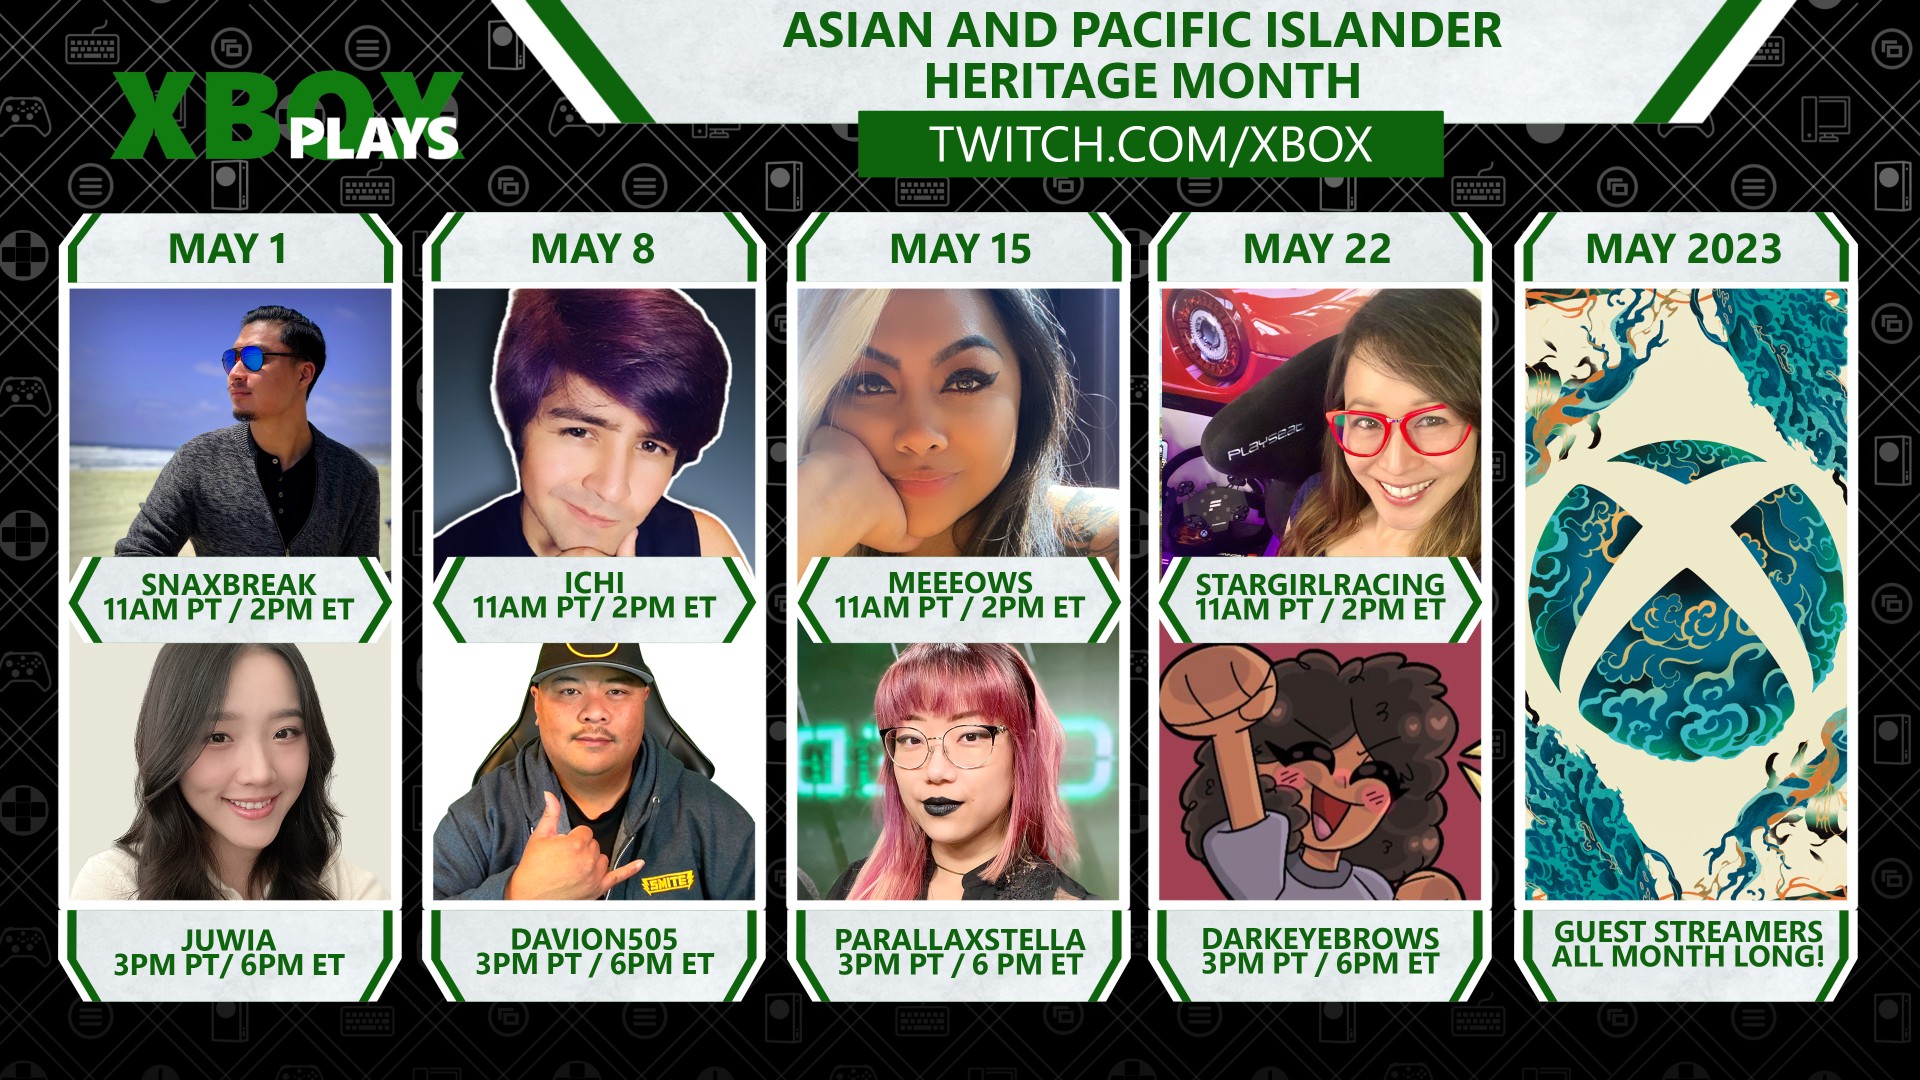 A compilation image featuring 8 streamers and the stylized Xbox logo with blue water in celebration of Asian and Pacific Islander Heritage Month.